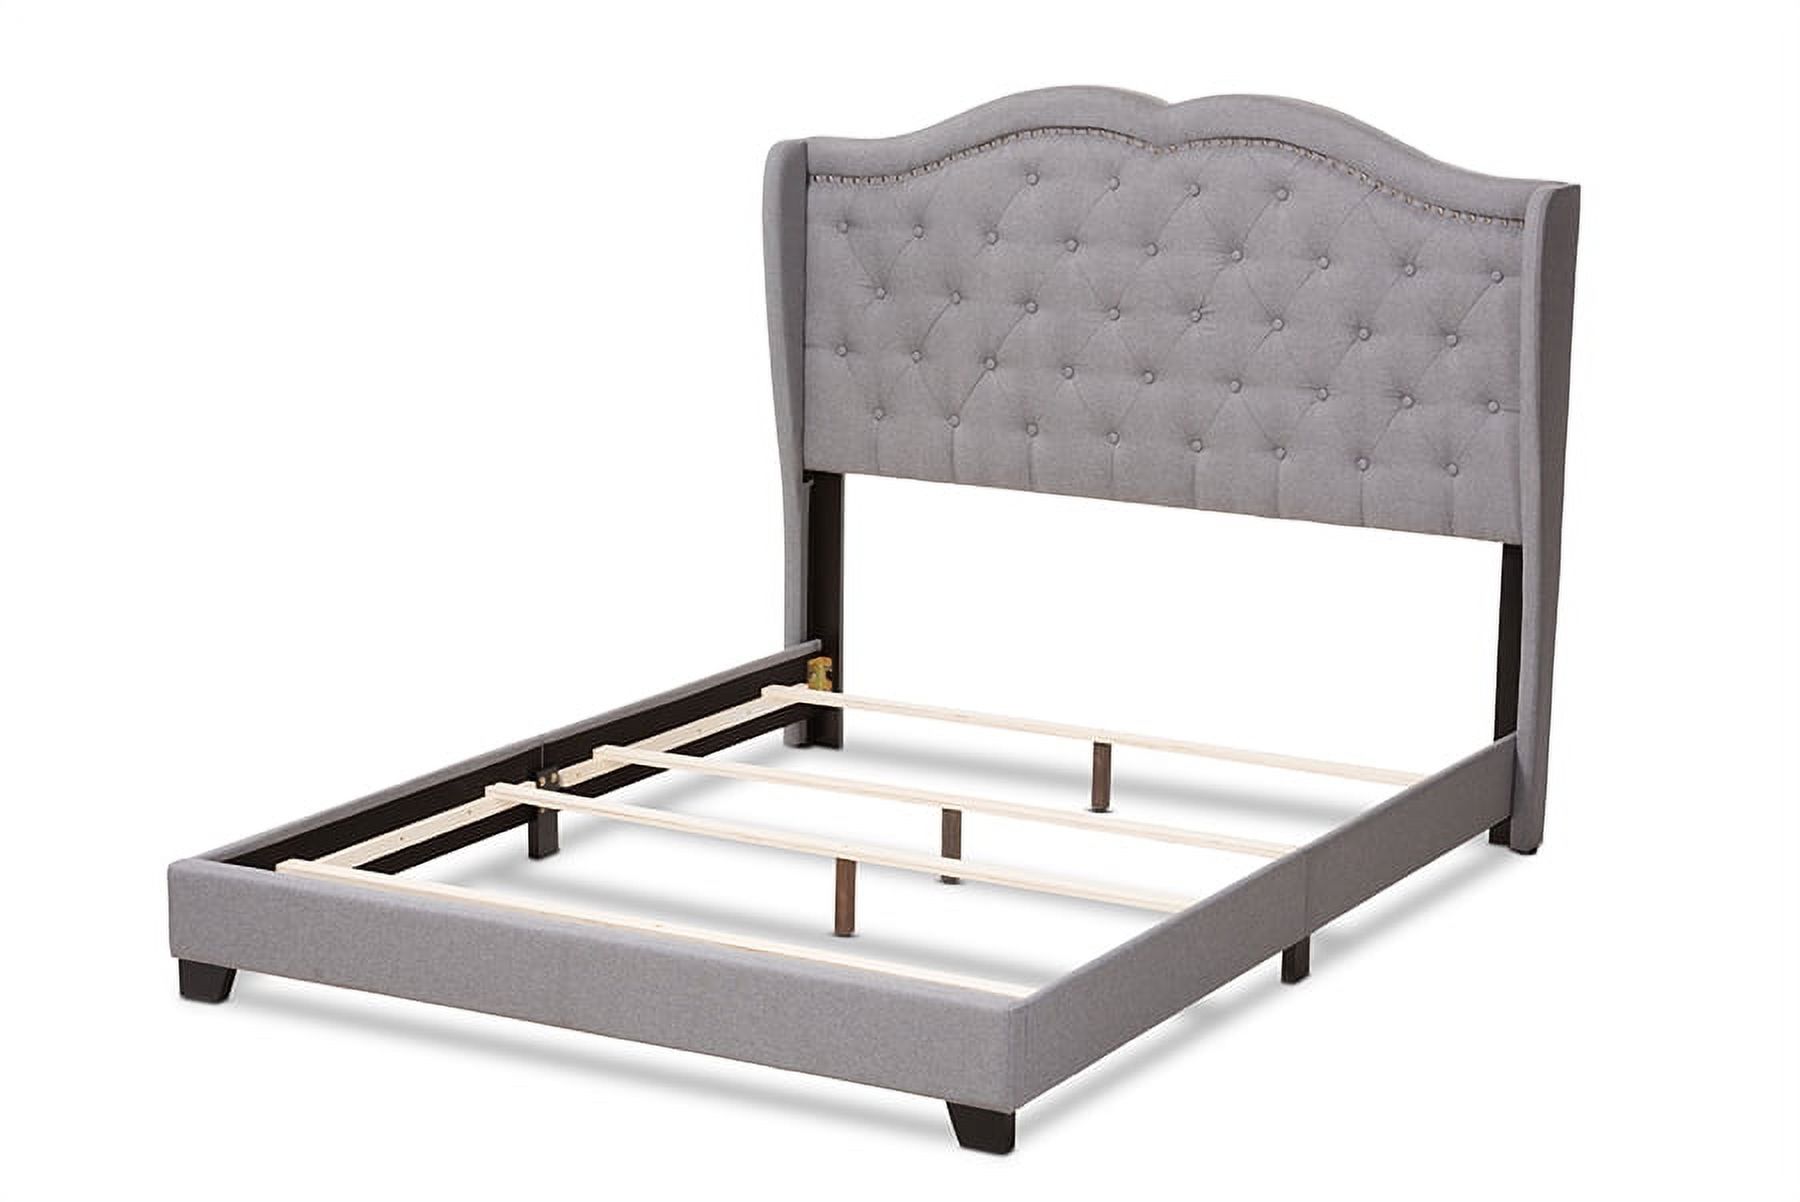 Baxton Studio Aden Modern and Contemporary Grey Fabric Upholstered Full Size Bed - image 3 of 6